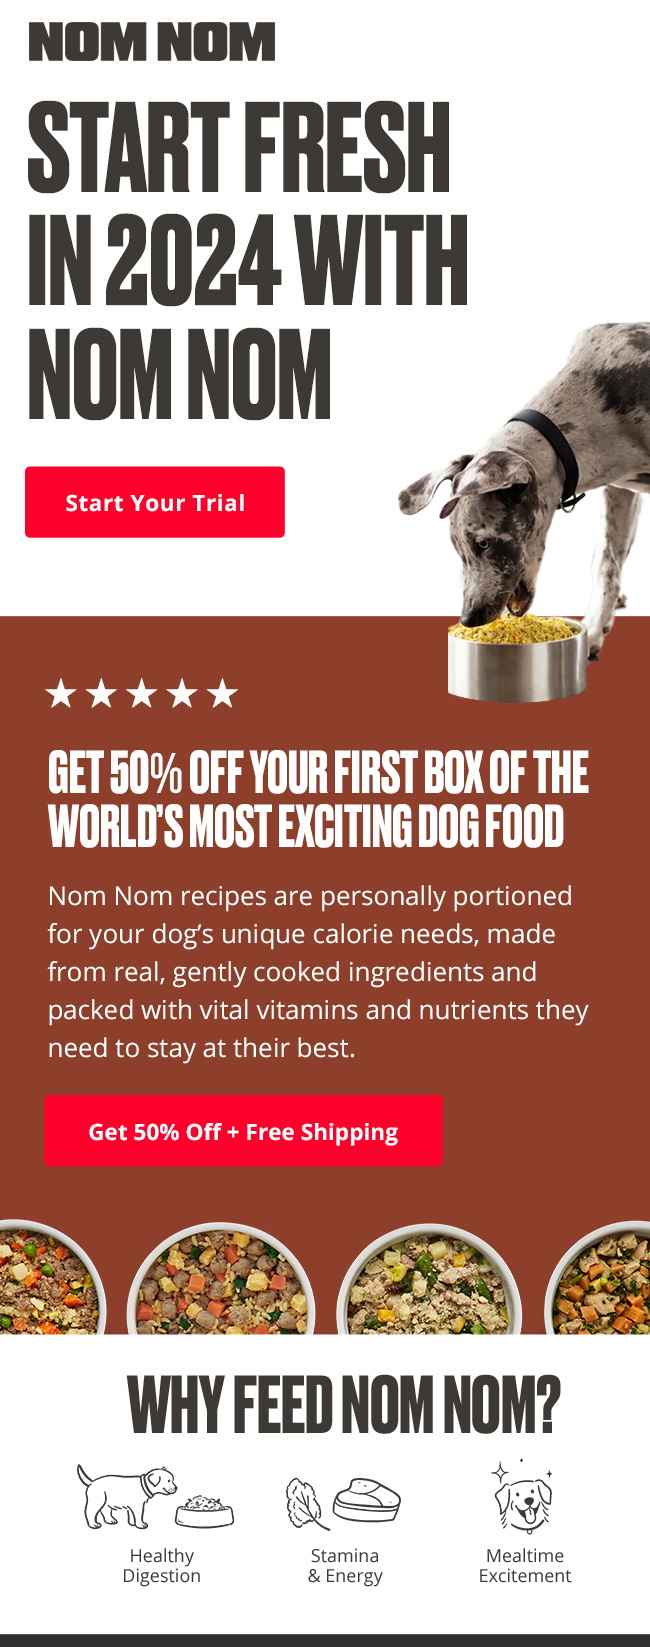 New Year, New Savings! Save 50% on your first order of dog food